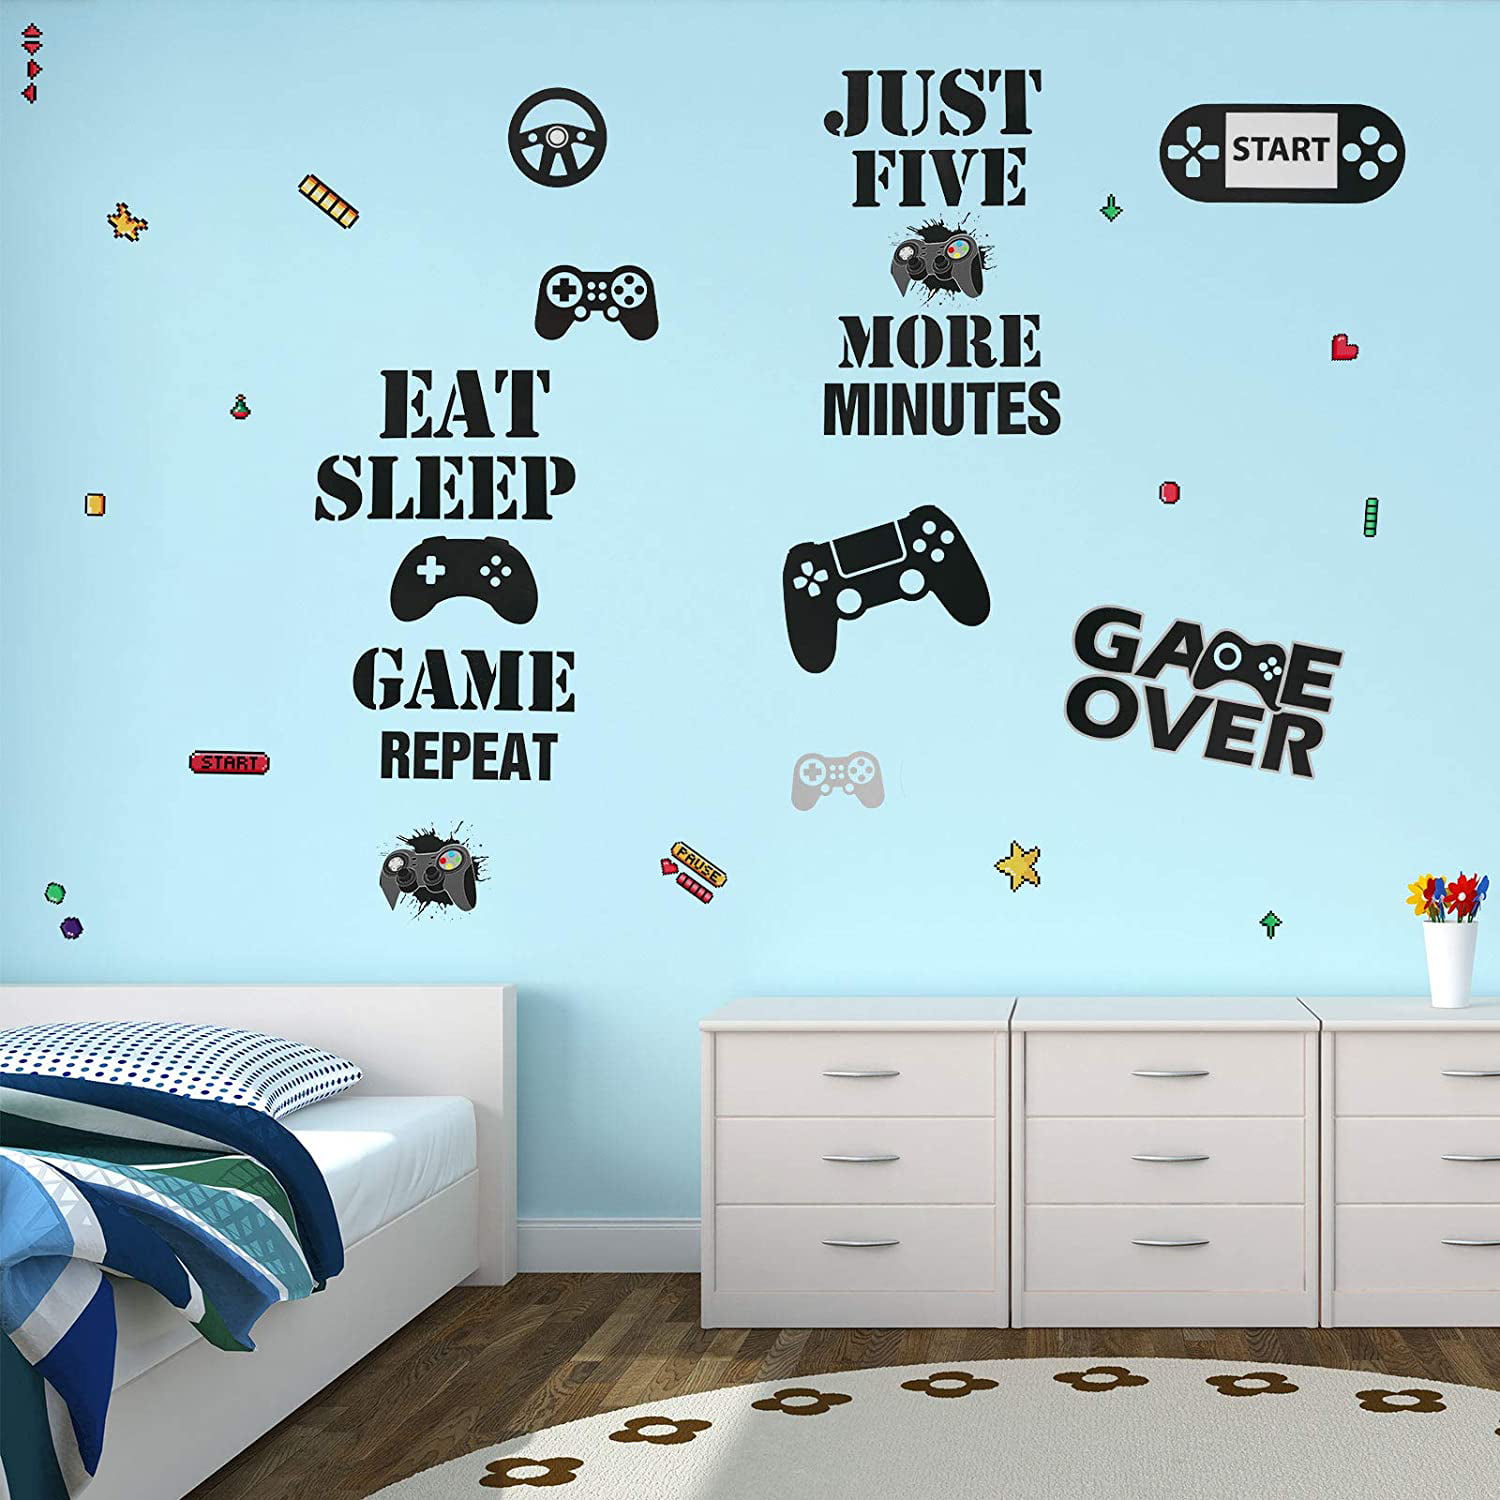 GADGETS WRAP 2020 Gamer Wall Sticker for Game Room Decor Kids Room